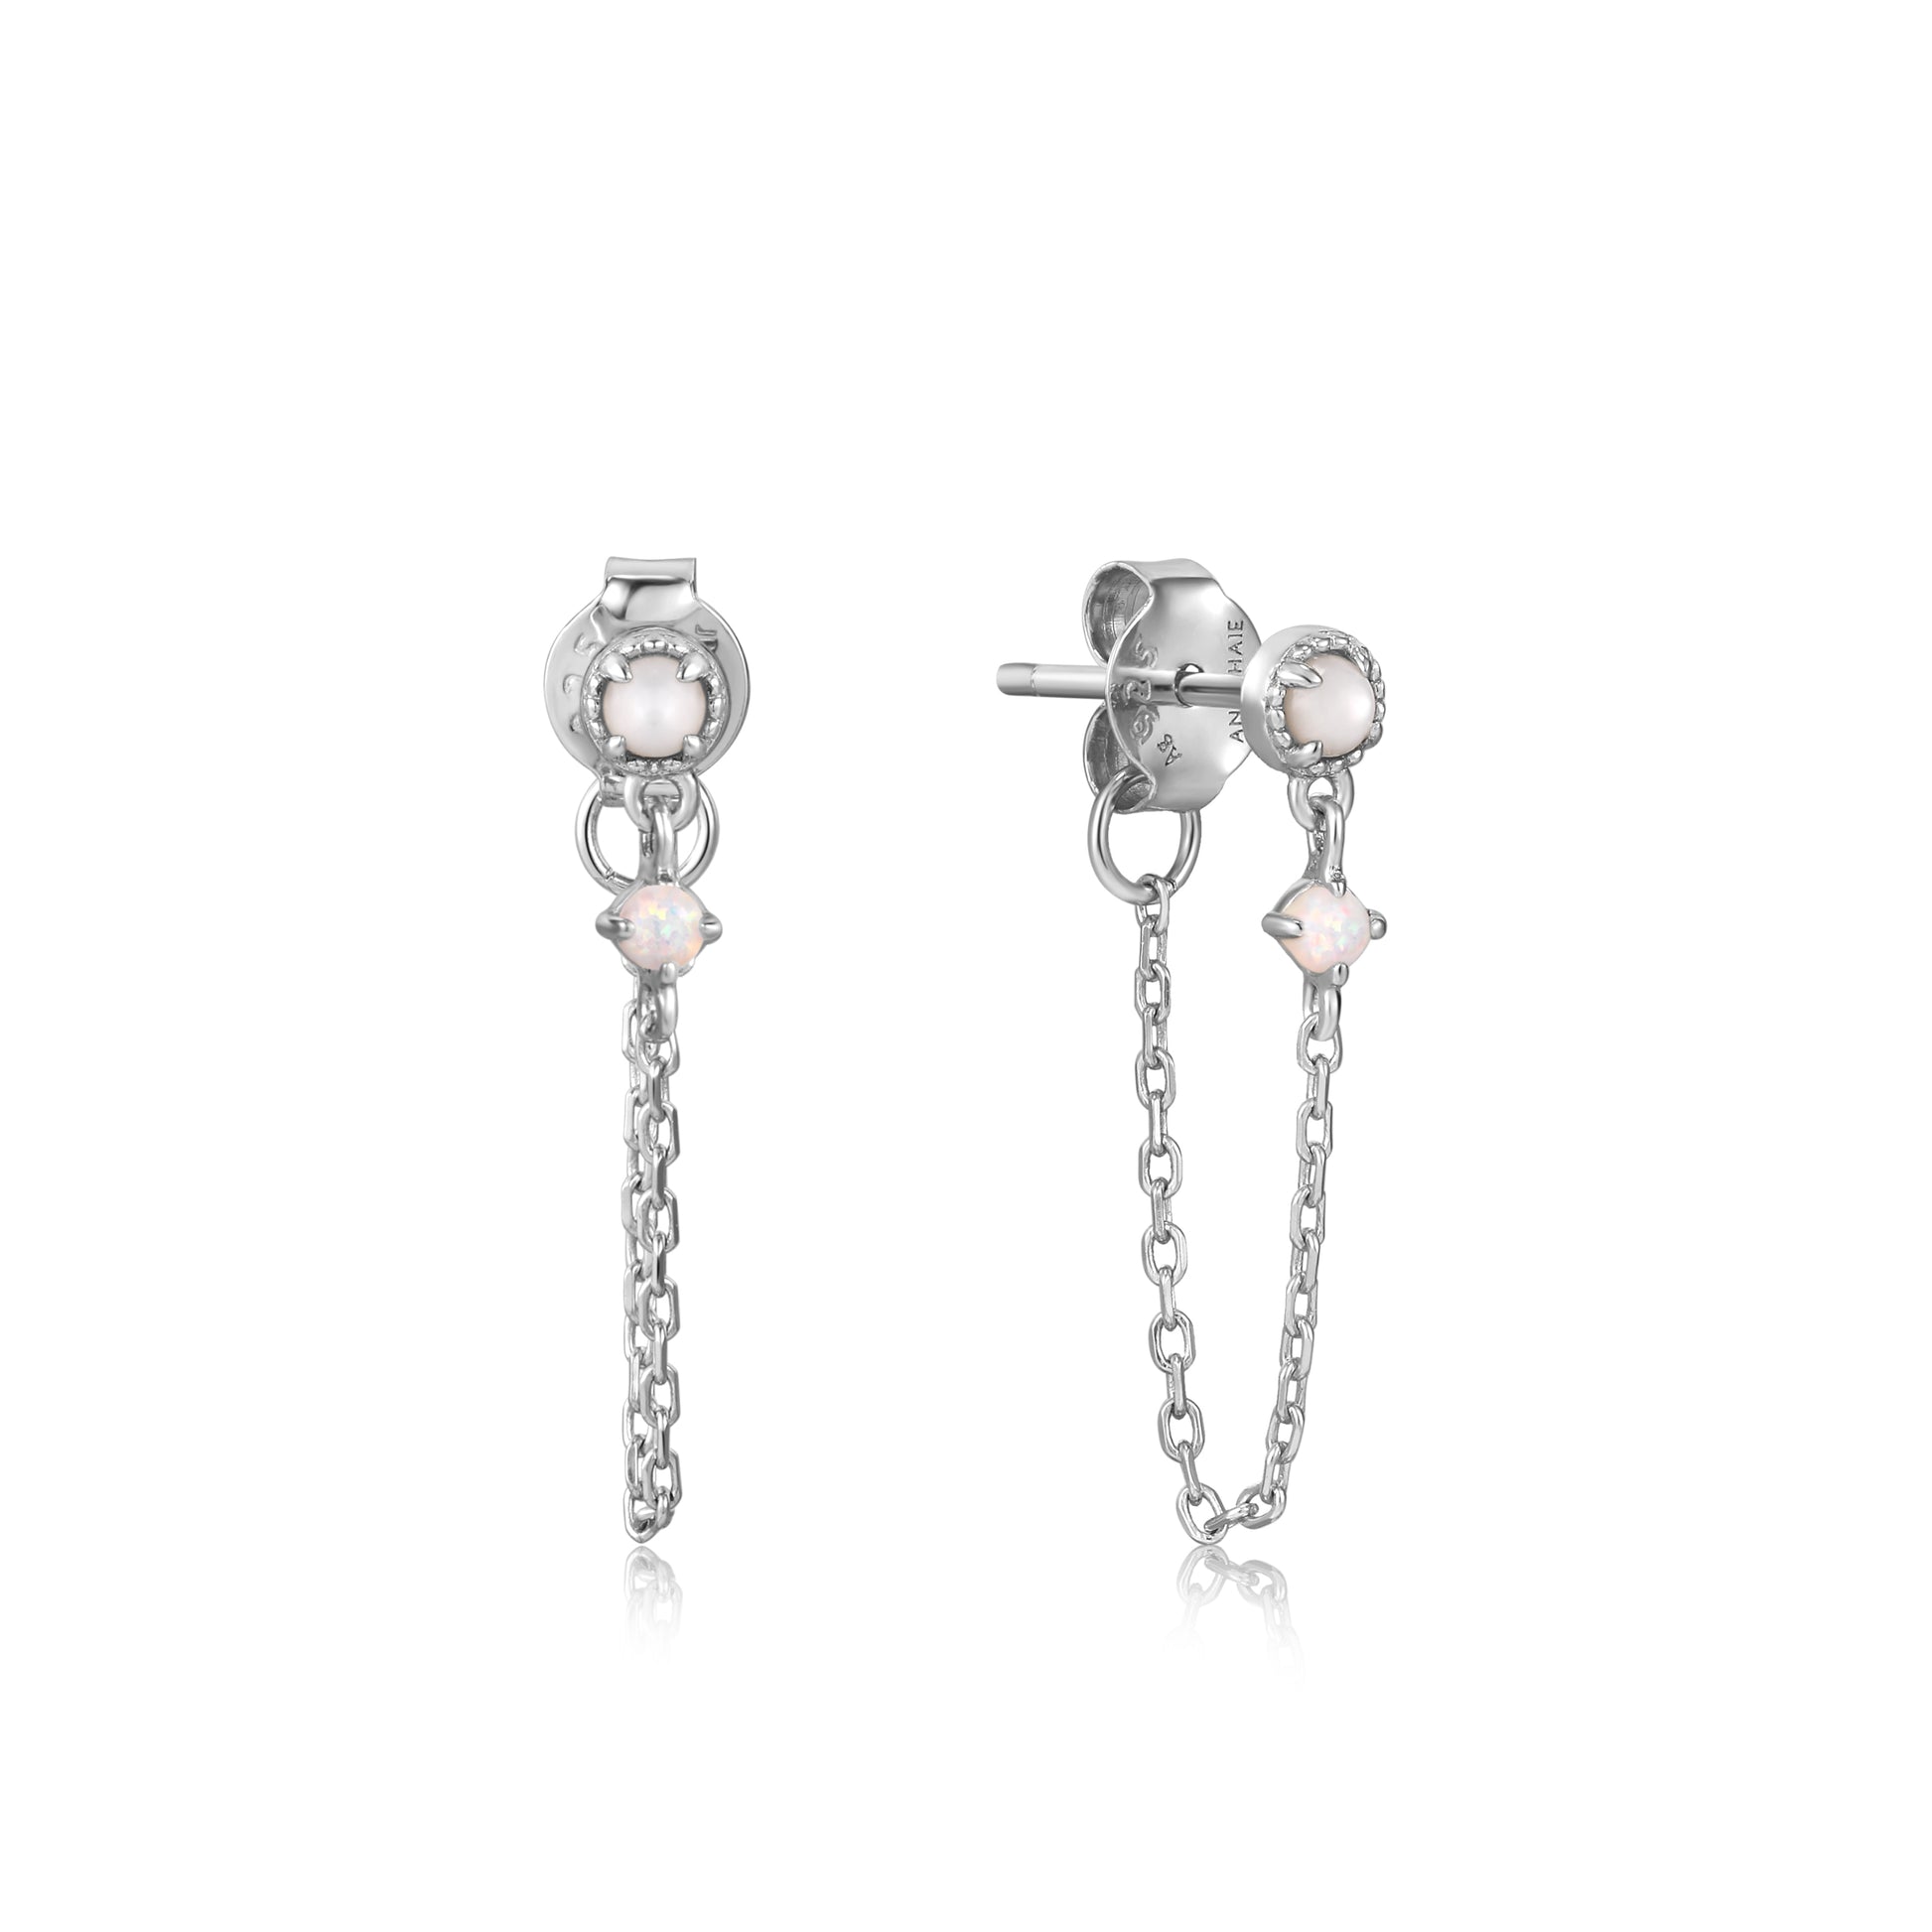 Ania Haie Silver Mother of Pearl and Kyoto Opal Chain Drop Stud Earrings - Silver Earrings